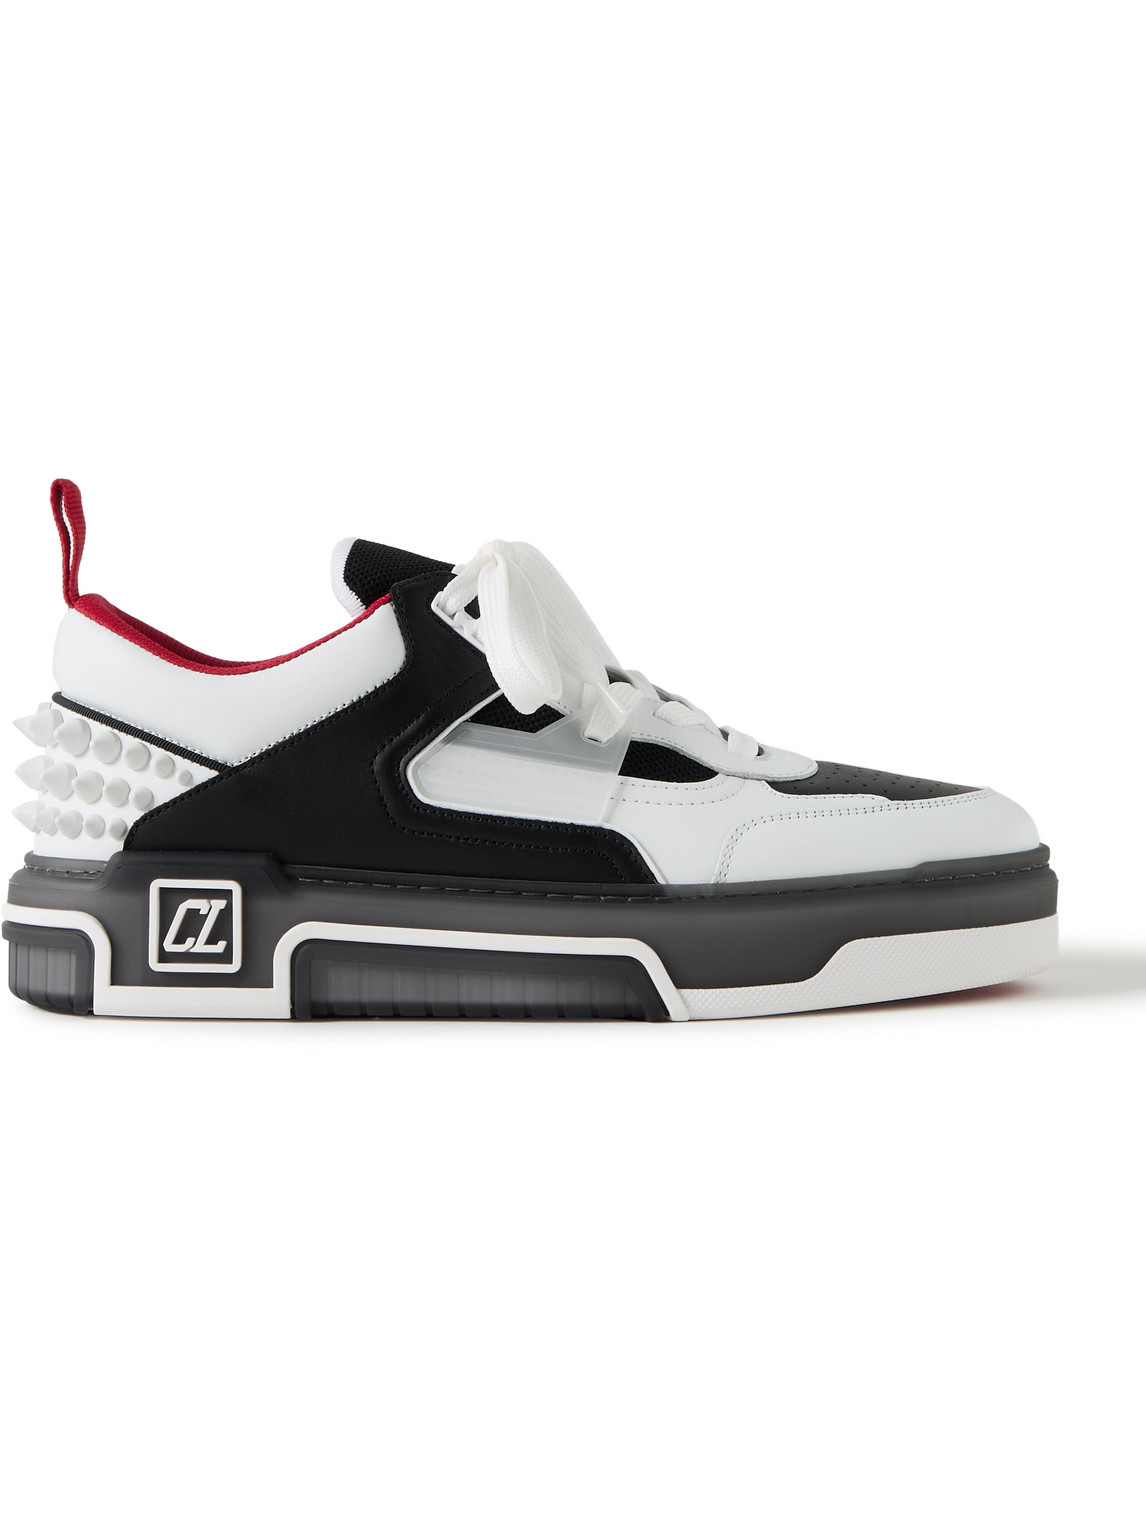 Christian Louboutin Astroloubi Spiked Leather And Mesh Sneakers In White